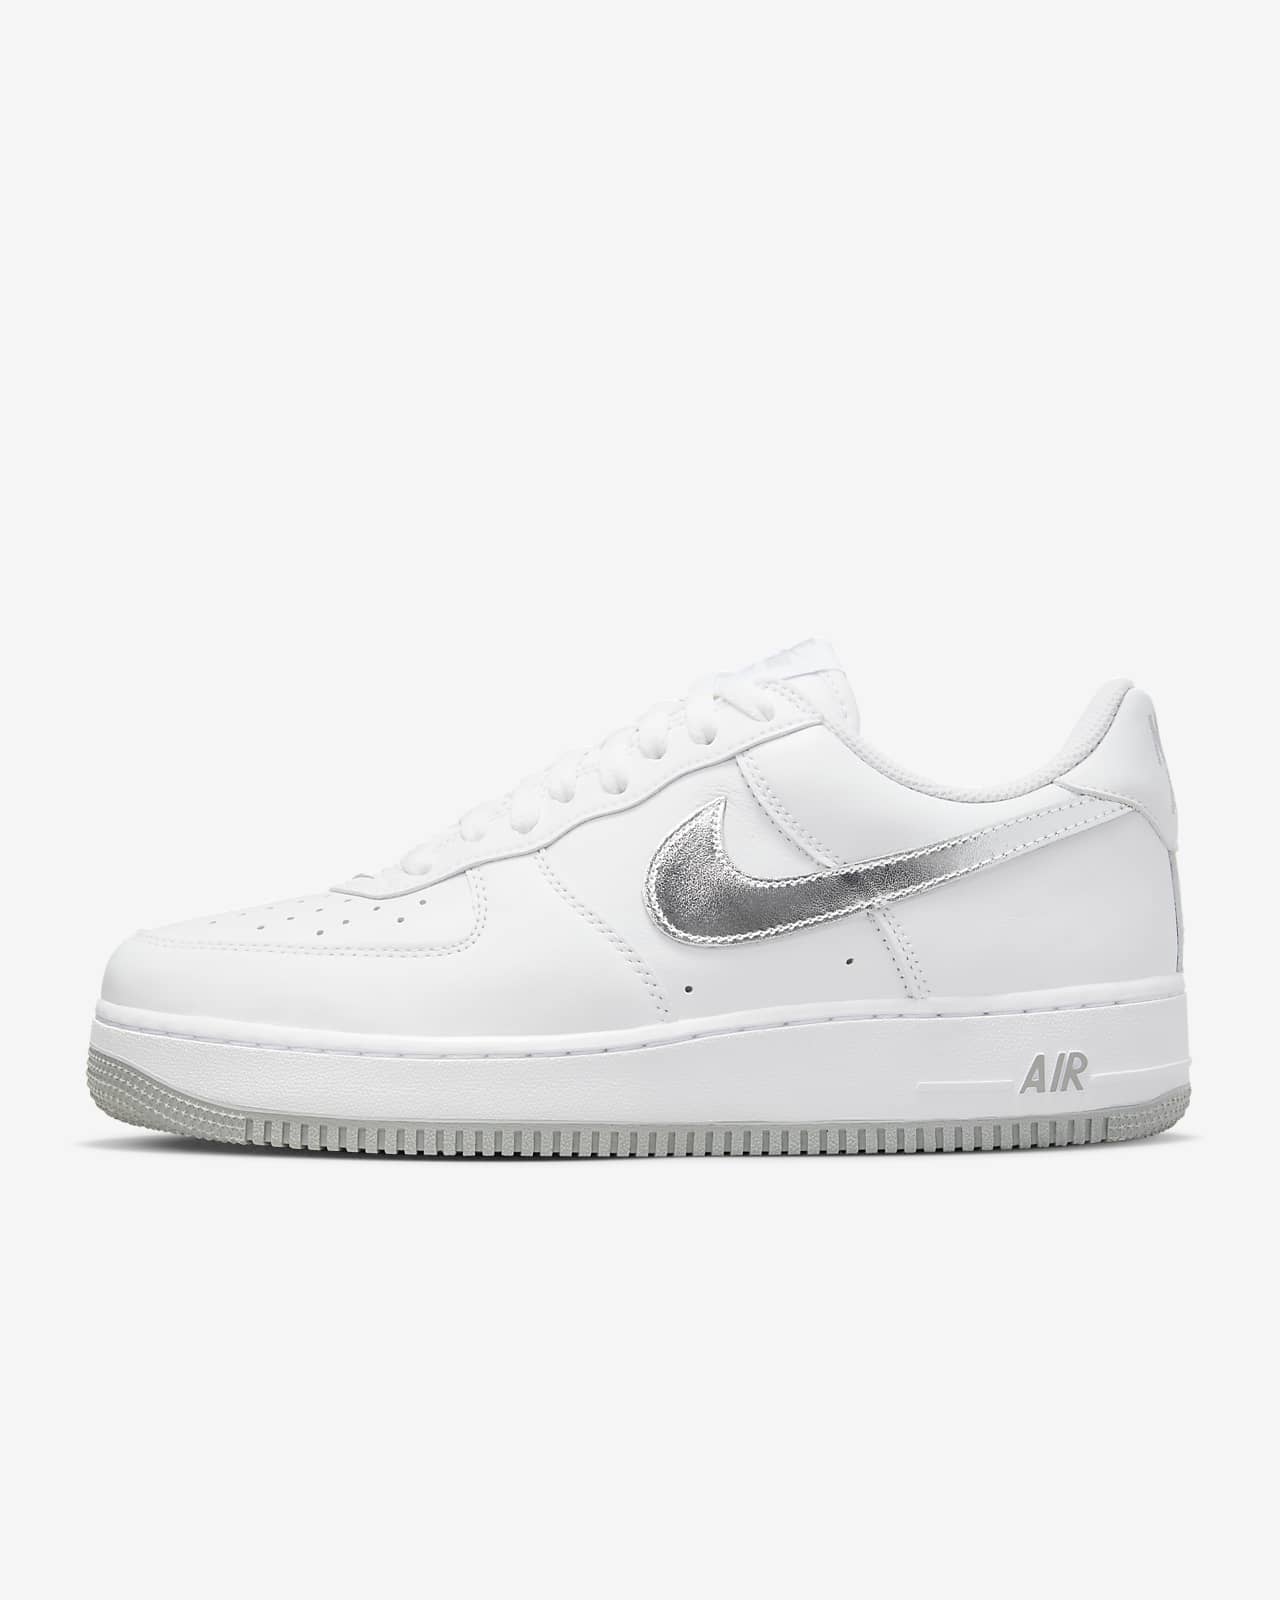 Nike Force 1 Low Retro Shoes.